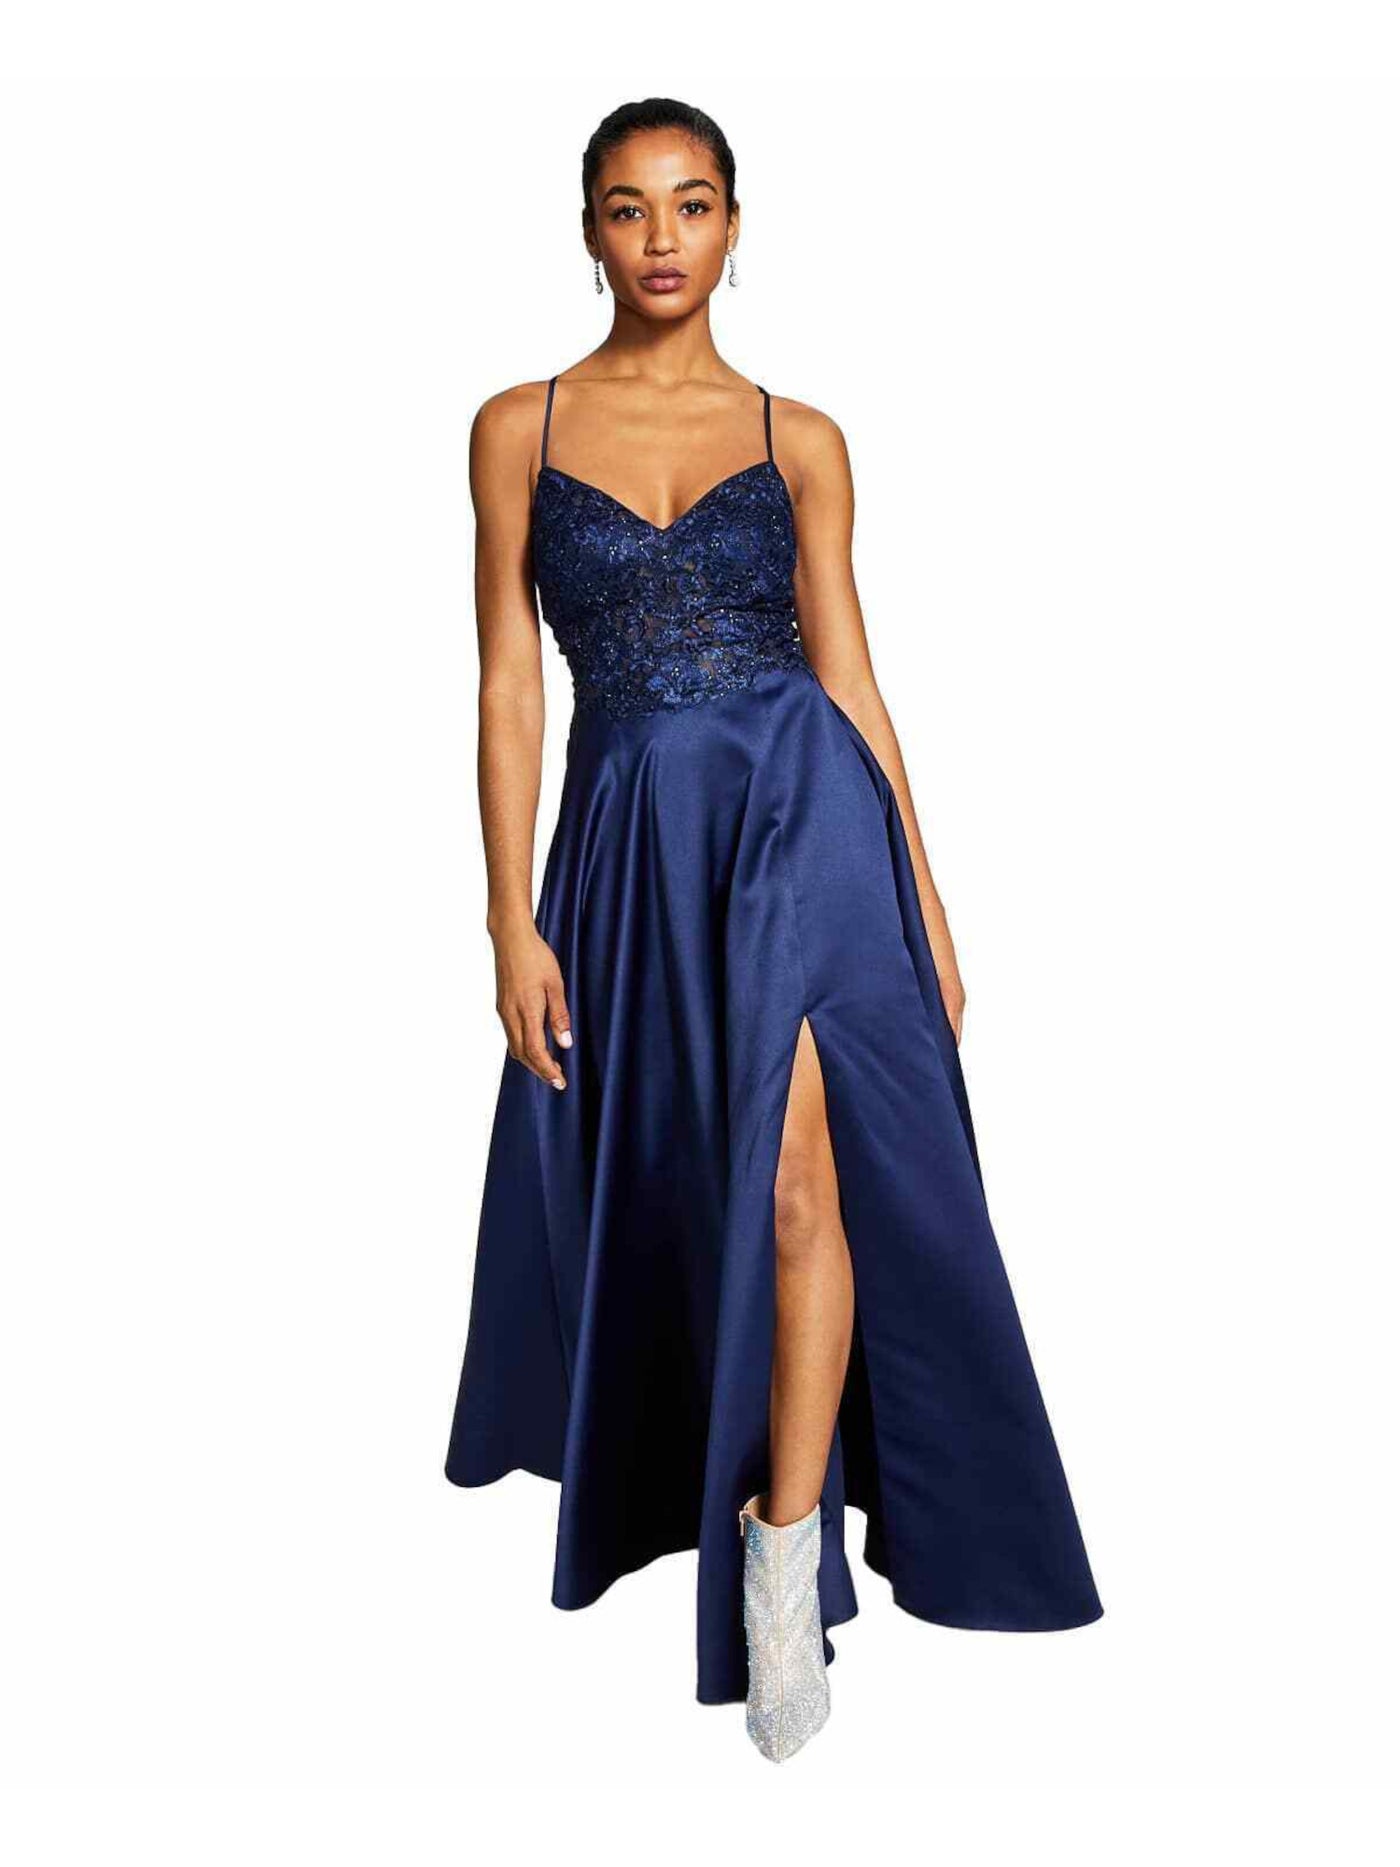 BLONDIE Womens Navy Zippered Rhinestone Lace Up Back Padded Slit Floral Spaghetti Strap Sweetheart Neckline Full-Length Formal Gown Dress Juniors 1